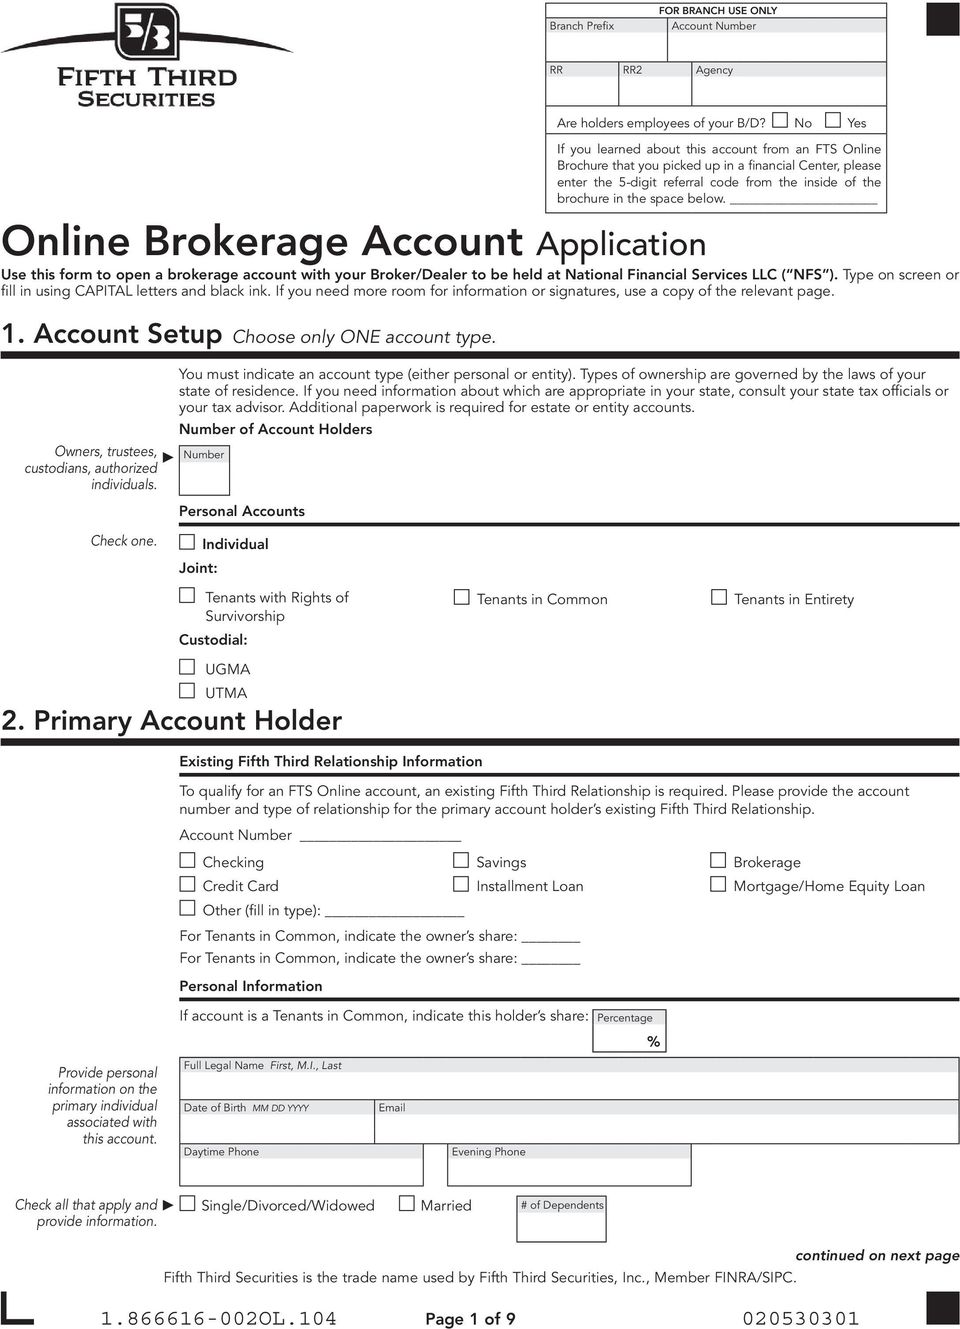 below. Use this form to open a brokerage account with your Broker/Dealer to be held at National Financial Services LLC ( NFS ). Type on screen or fill in using CAPITAL letters and black ink.